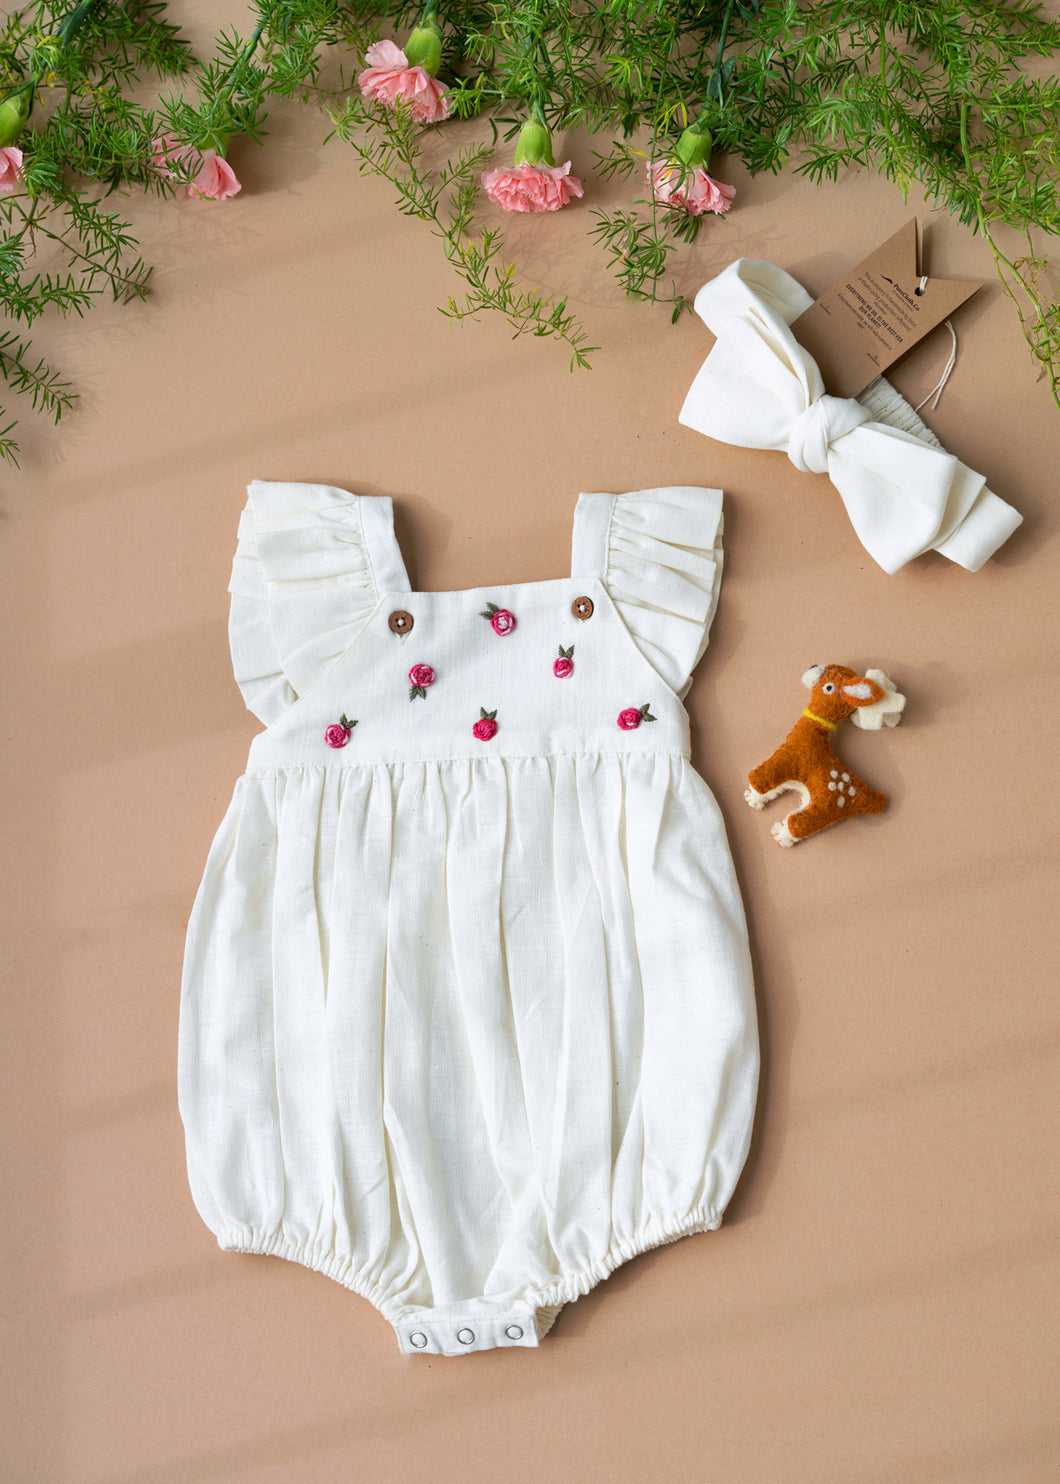 A white baby girl dress with head band and a cute little deer-friend is kept on a light peach background with some flowers aside.